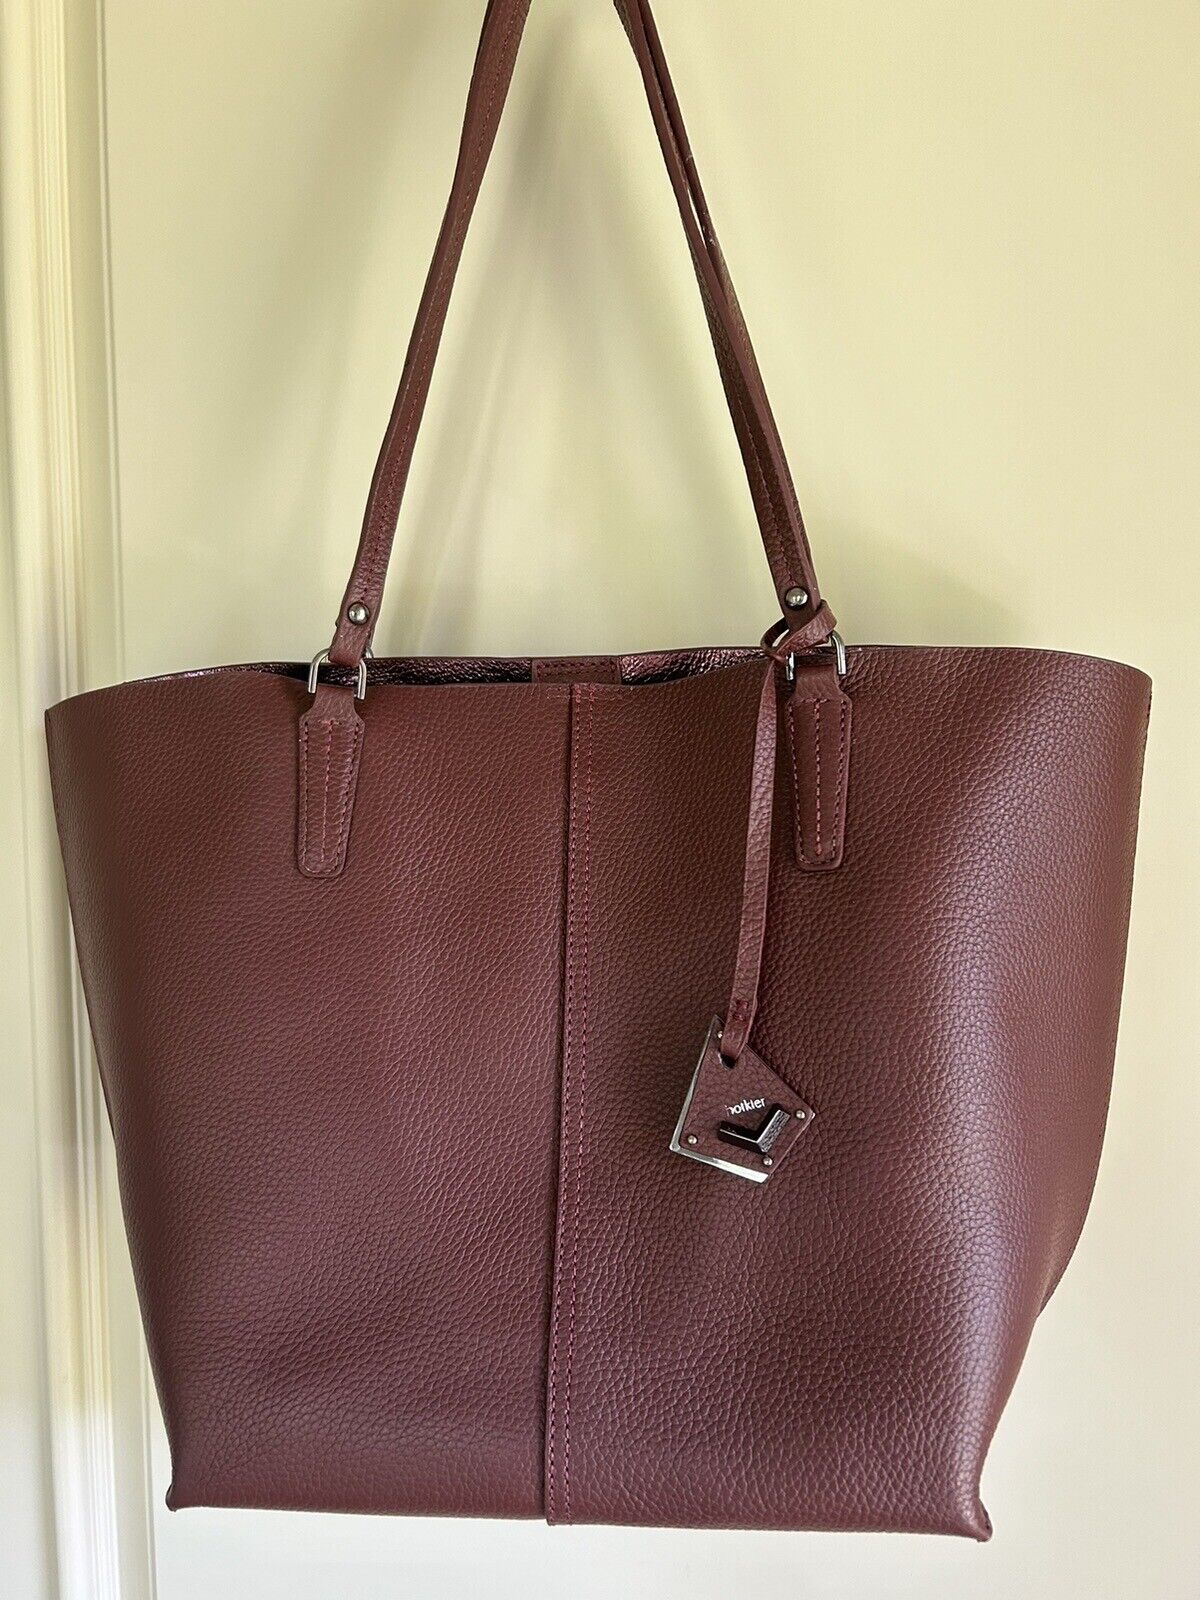 $248 NWOT BOTKIER LEATHER HUDSON TOTE W/ REMOVABLE POUCH & DUST BAG. BURGUNDY